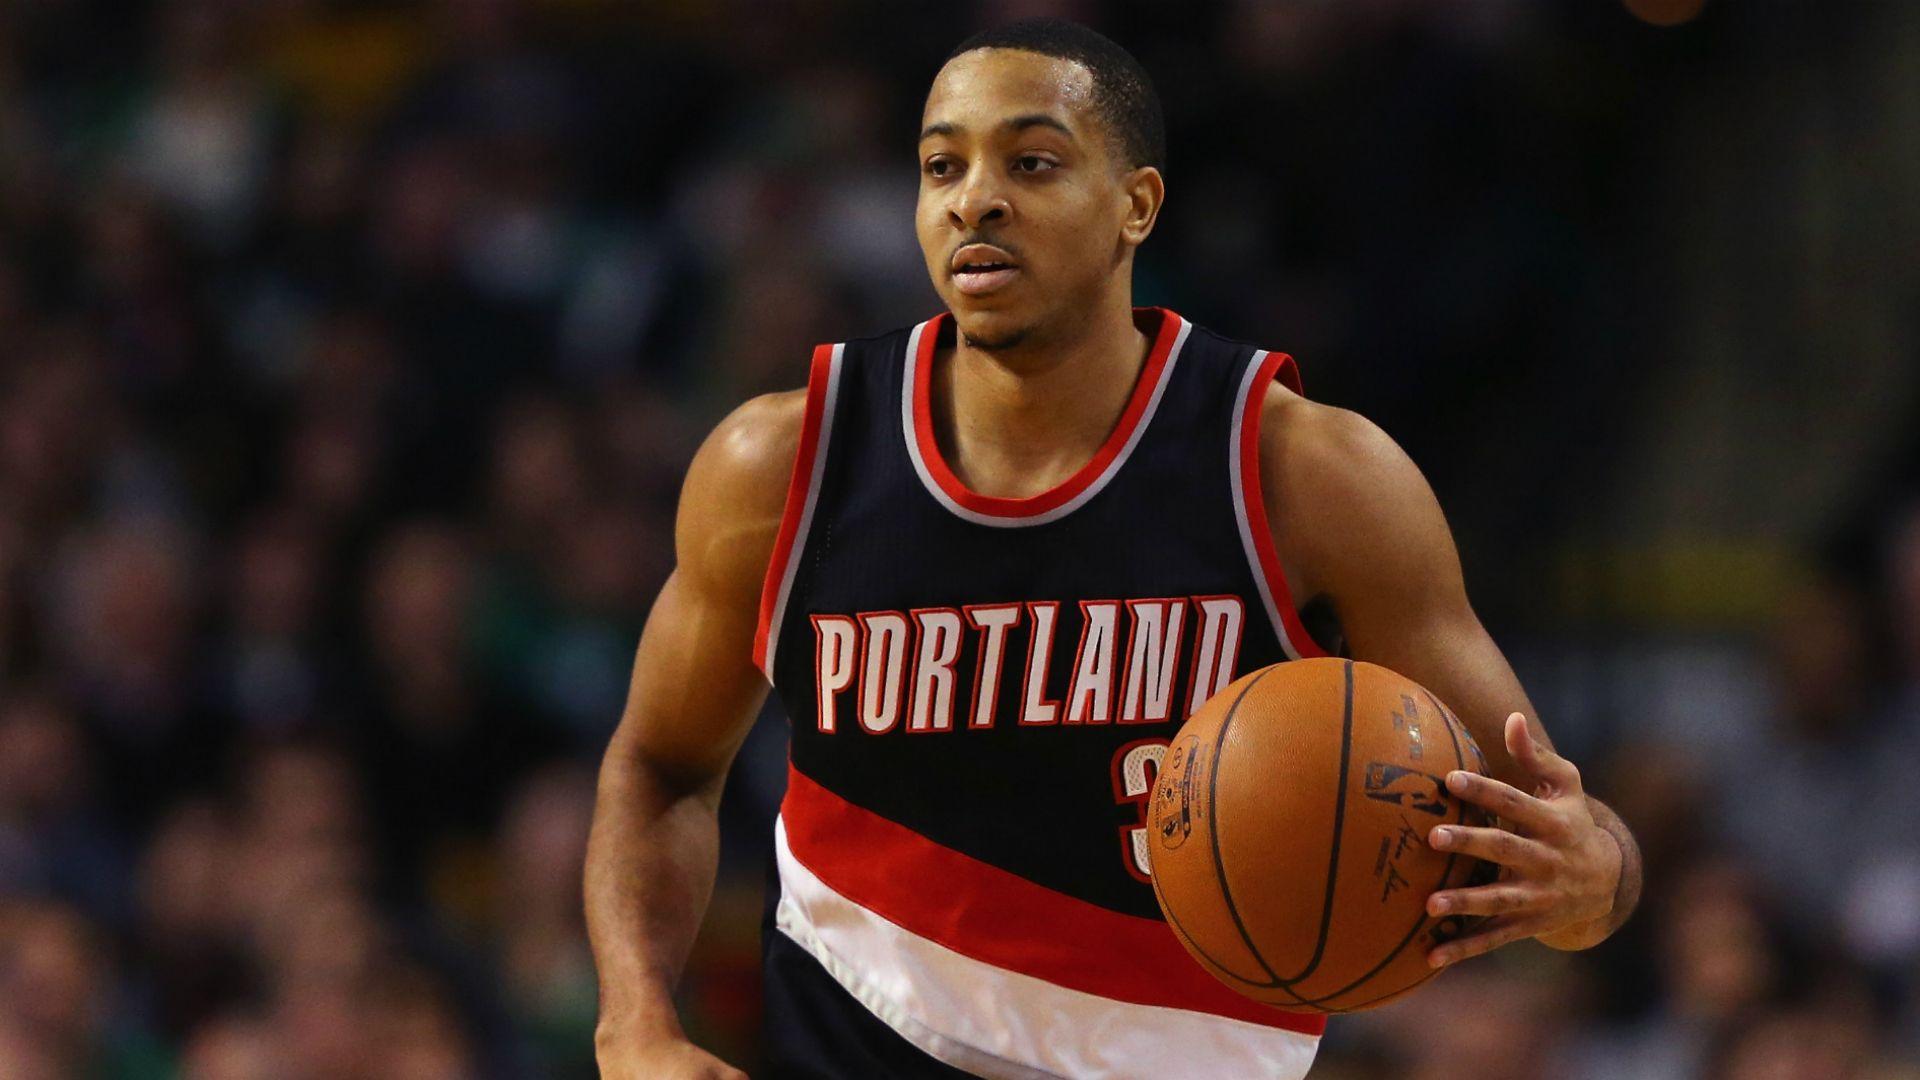 Blazers' C.J. McCollum suspended for leaving bench during